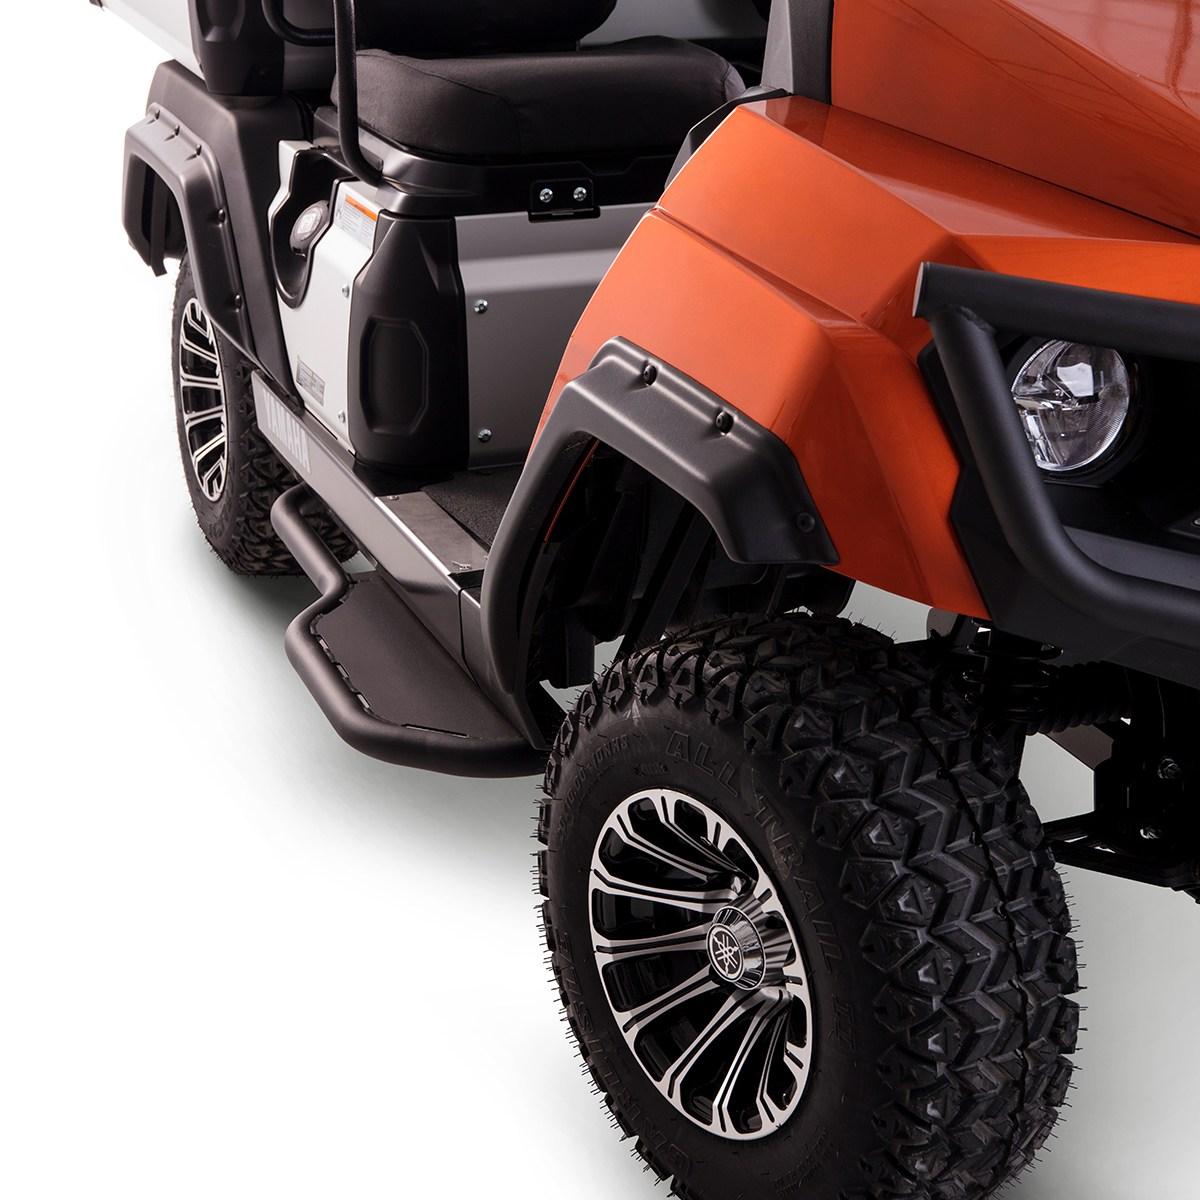 Defend yourself and your UMAX against mud, water and debris with this four-piece fender kit. This kit is made of highly durable materials and integrates perfectly with the hard-work-ready look and feel of your UMAX.